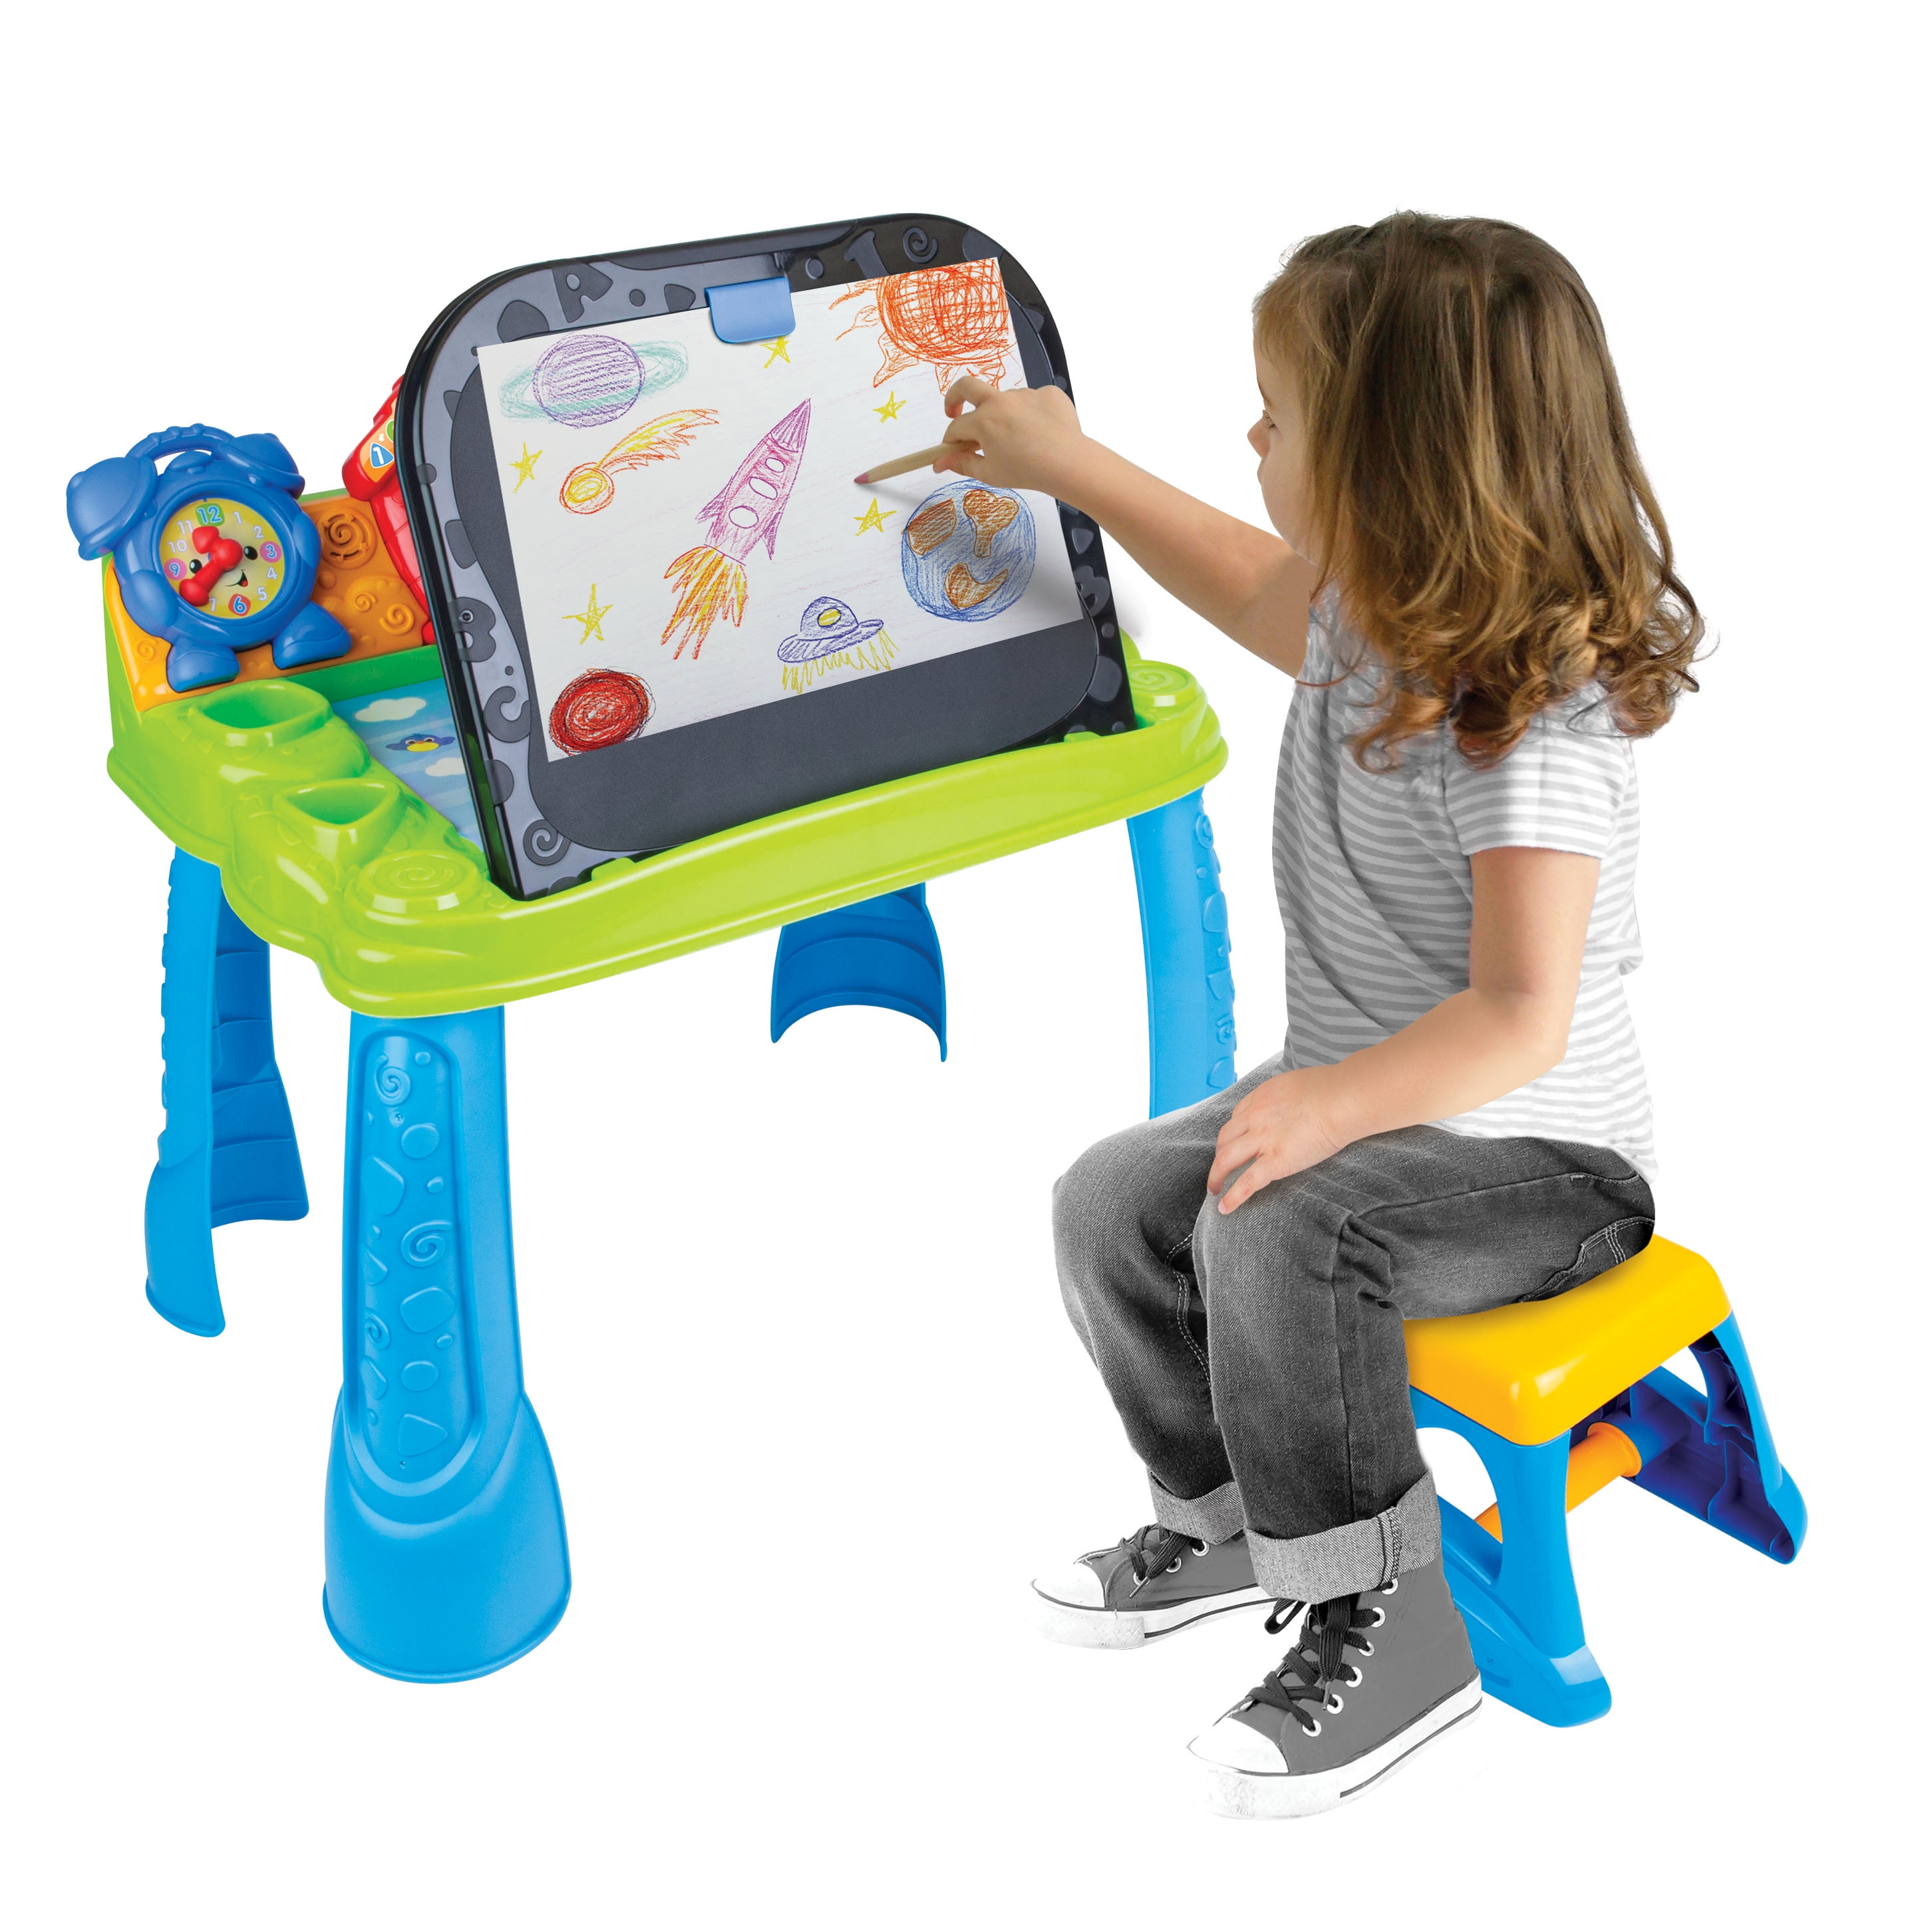 Add Fun To Your Desk! 🥳 A fun and interactive toy with real